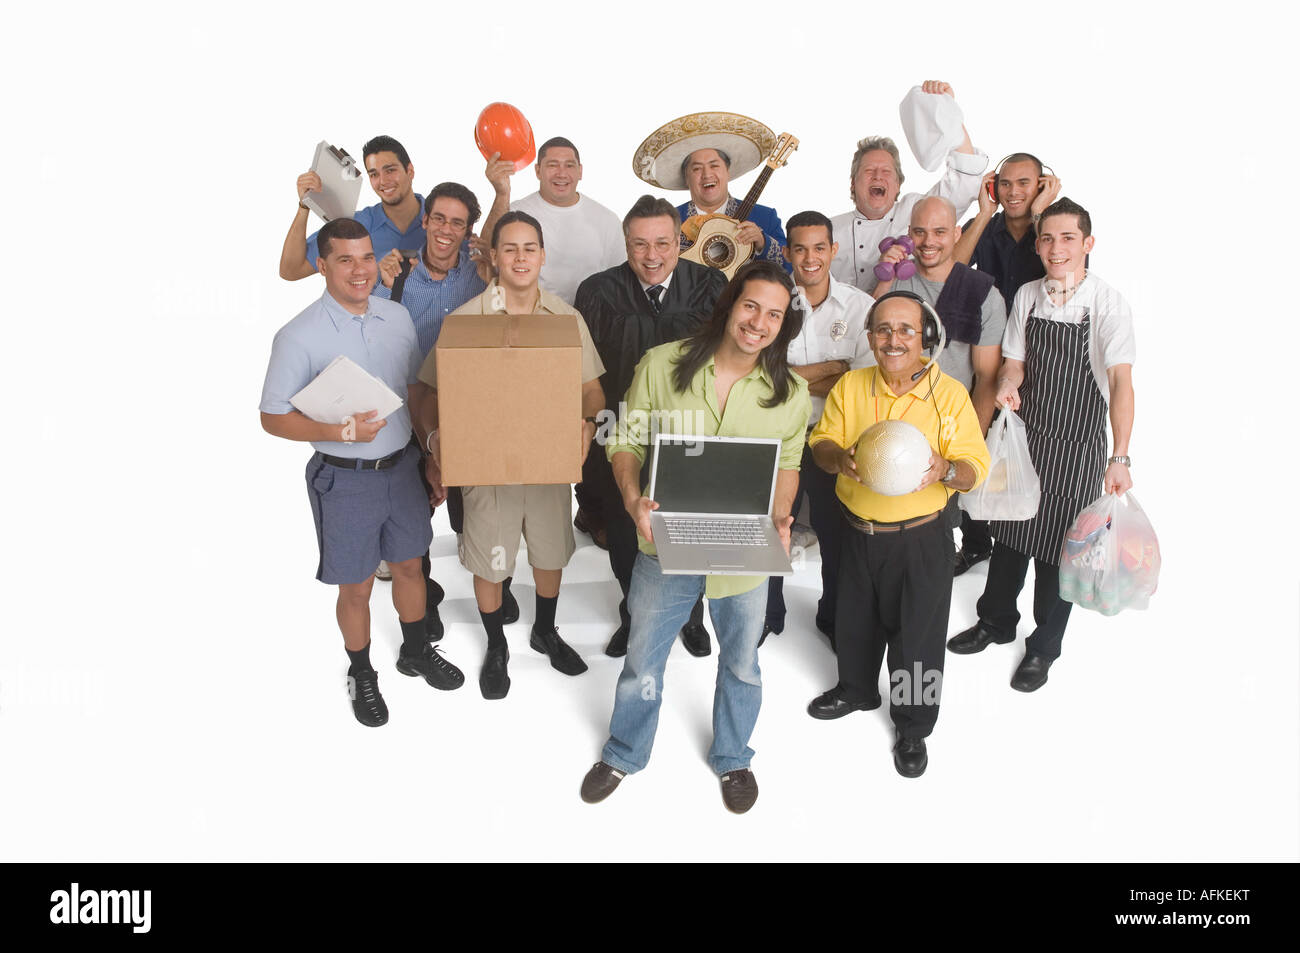 Group portrait of men in different professions Stock Photo